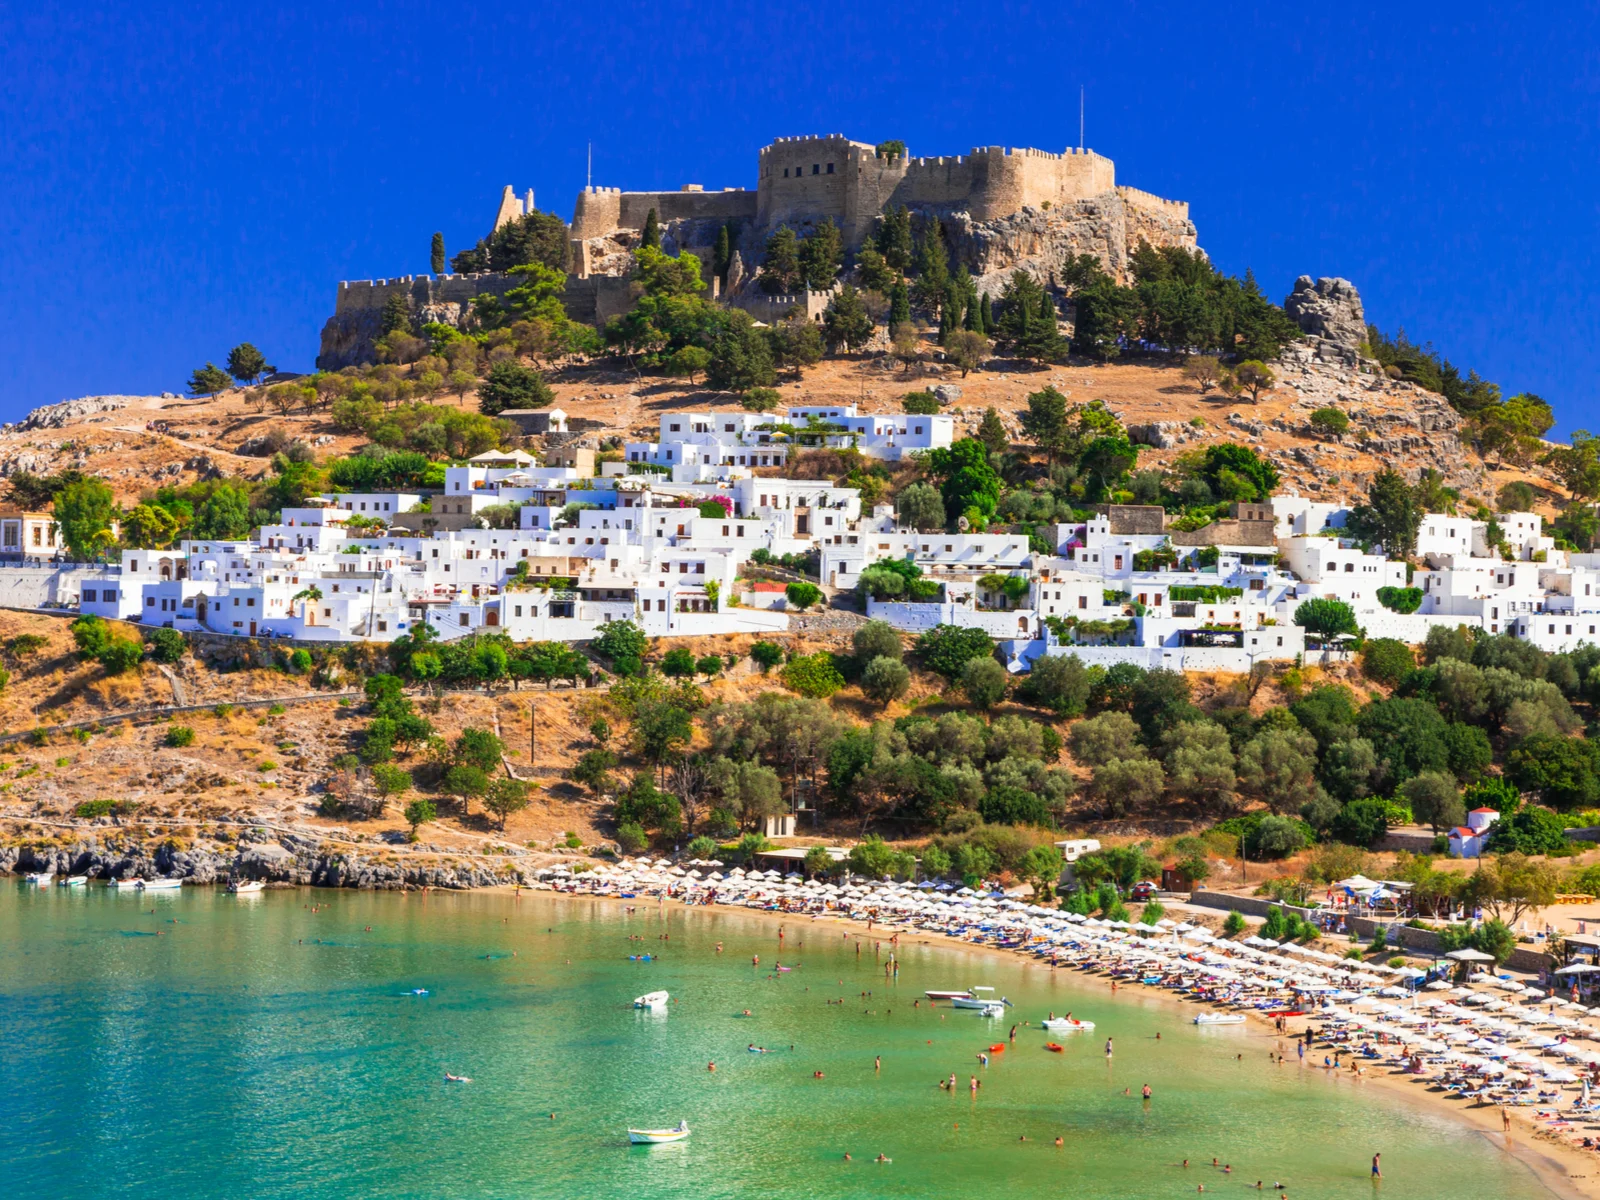 And old castle sitting on a mountain peak and white residential and commercial buildings at one of the best islands in Greece to visit, Rhodes Island with its busy beach during summer season